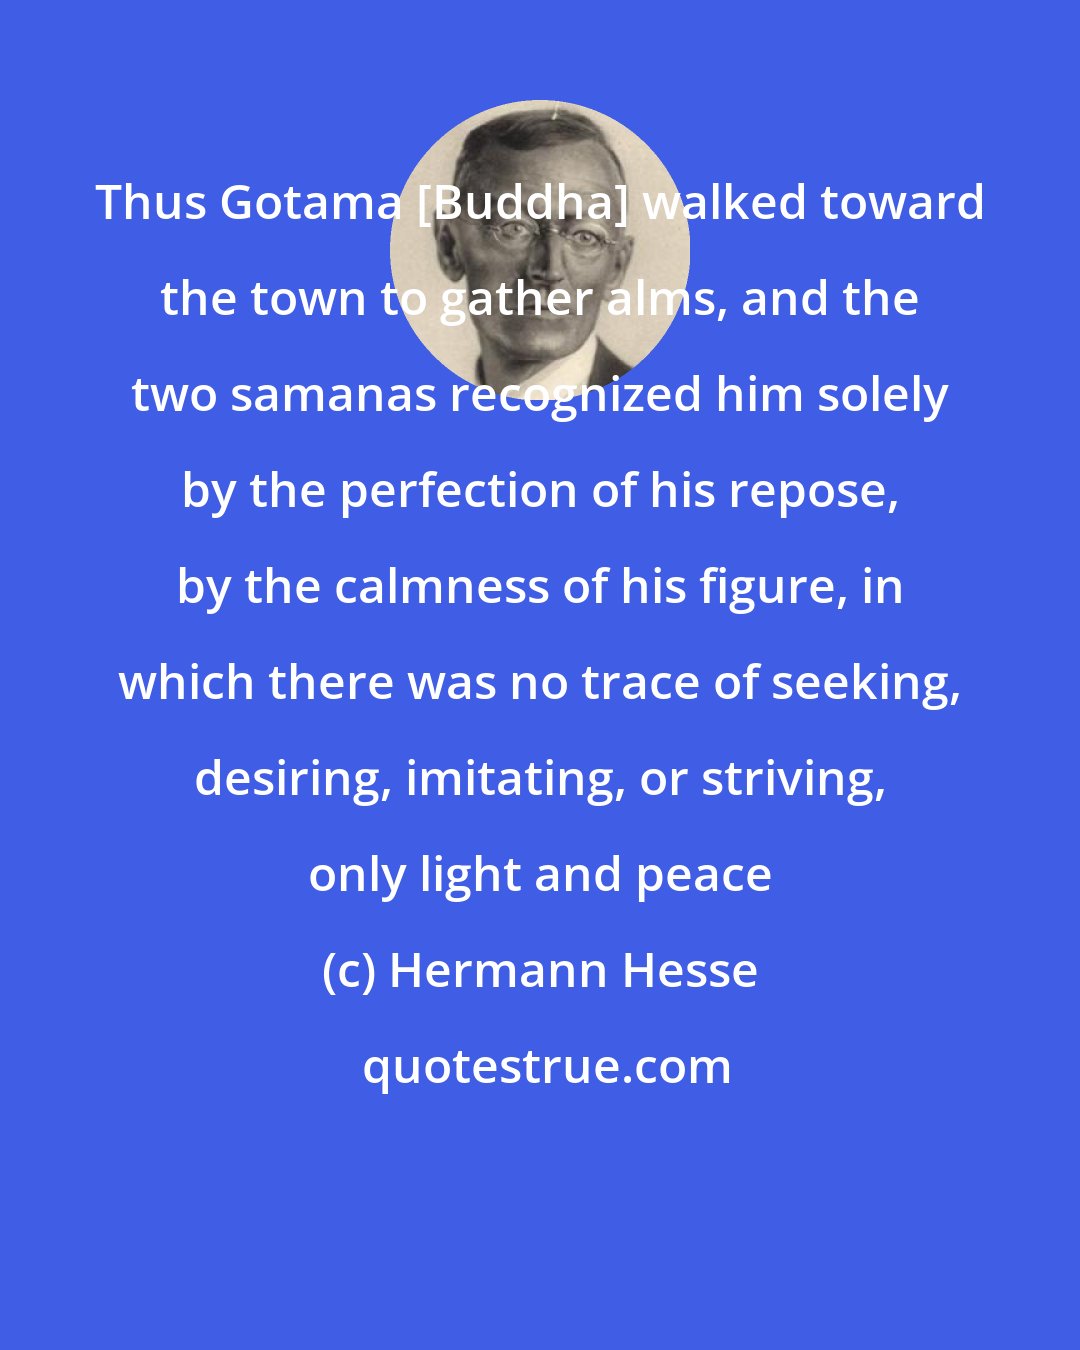 Hermann Hesse: Thus Gotama [Buddha] walked toward the town to gather alms, and the two samanas recognized him solely by the perfection of his repose, by the calmness of his figure, in which there was no trace of seeking, desiring, imitating, or striving, only light and peace